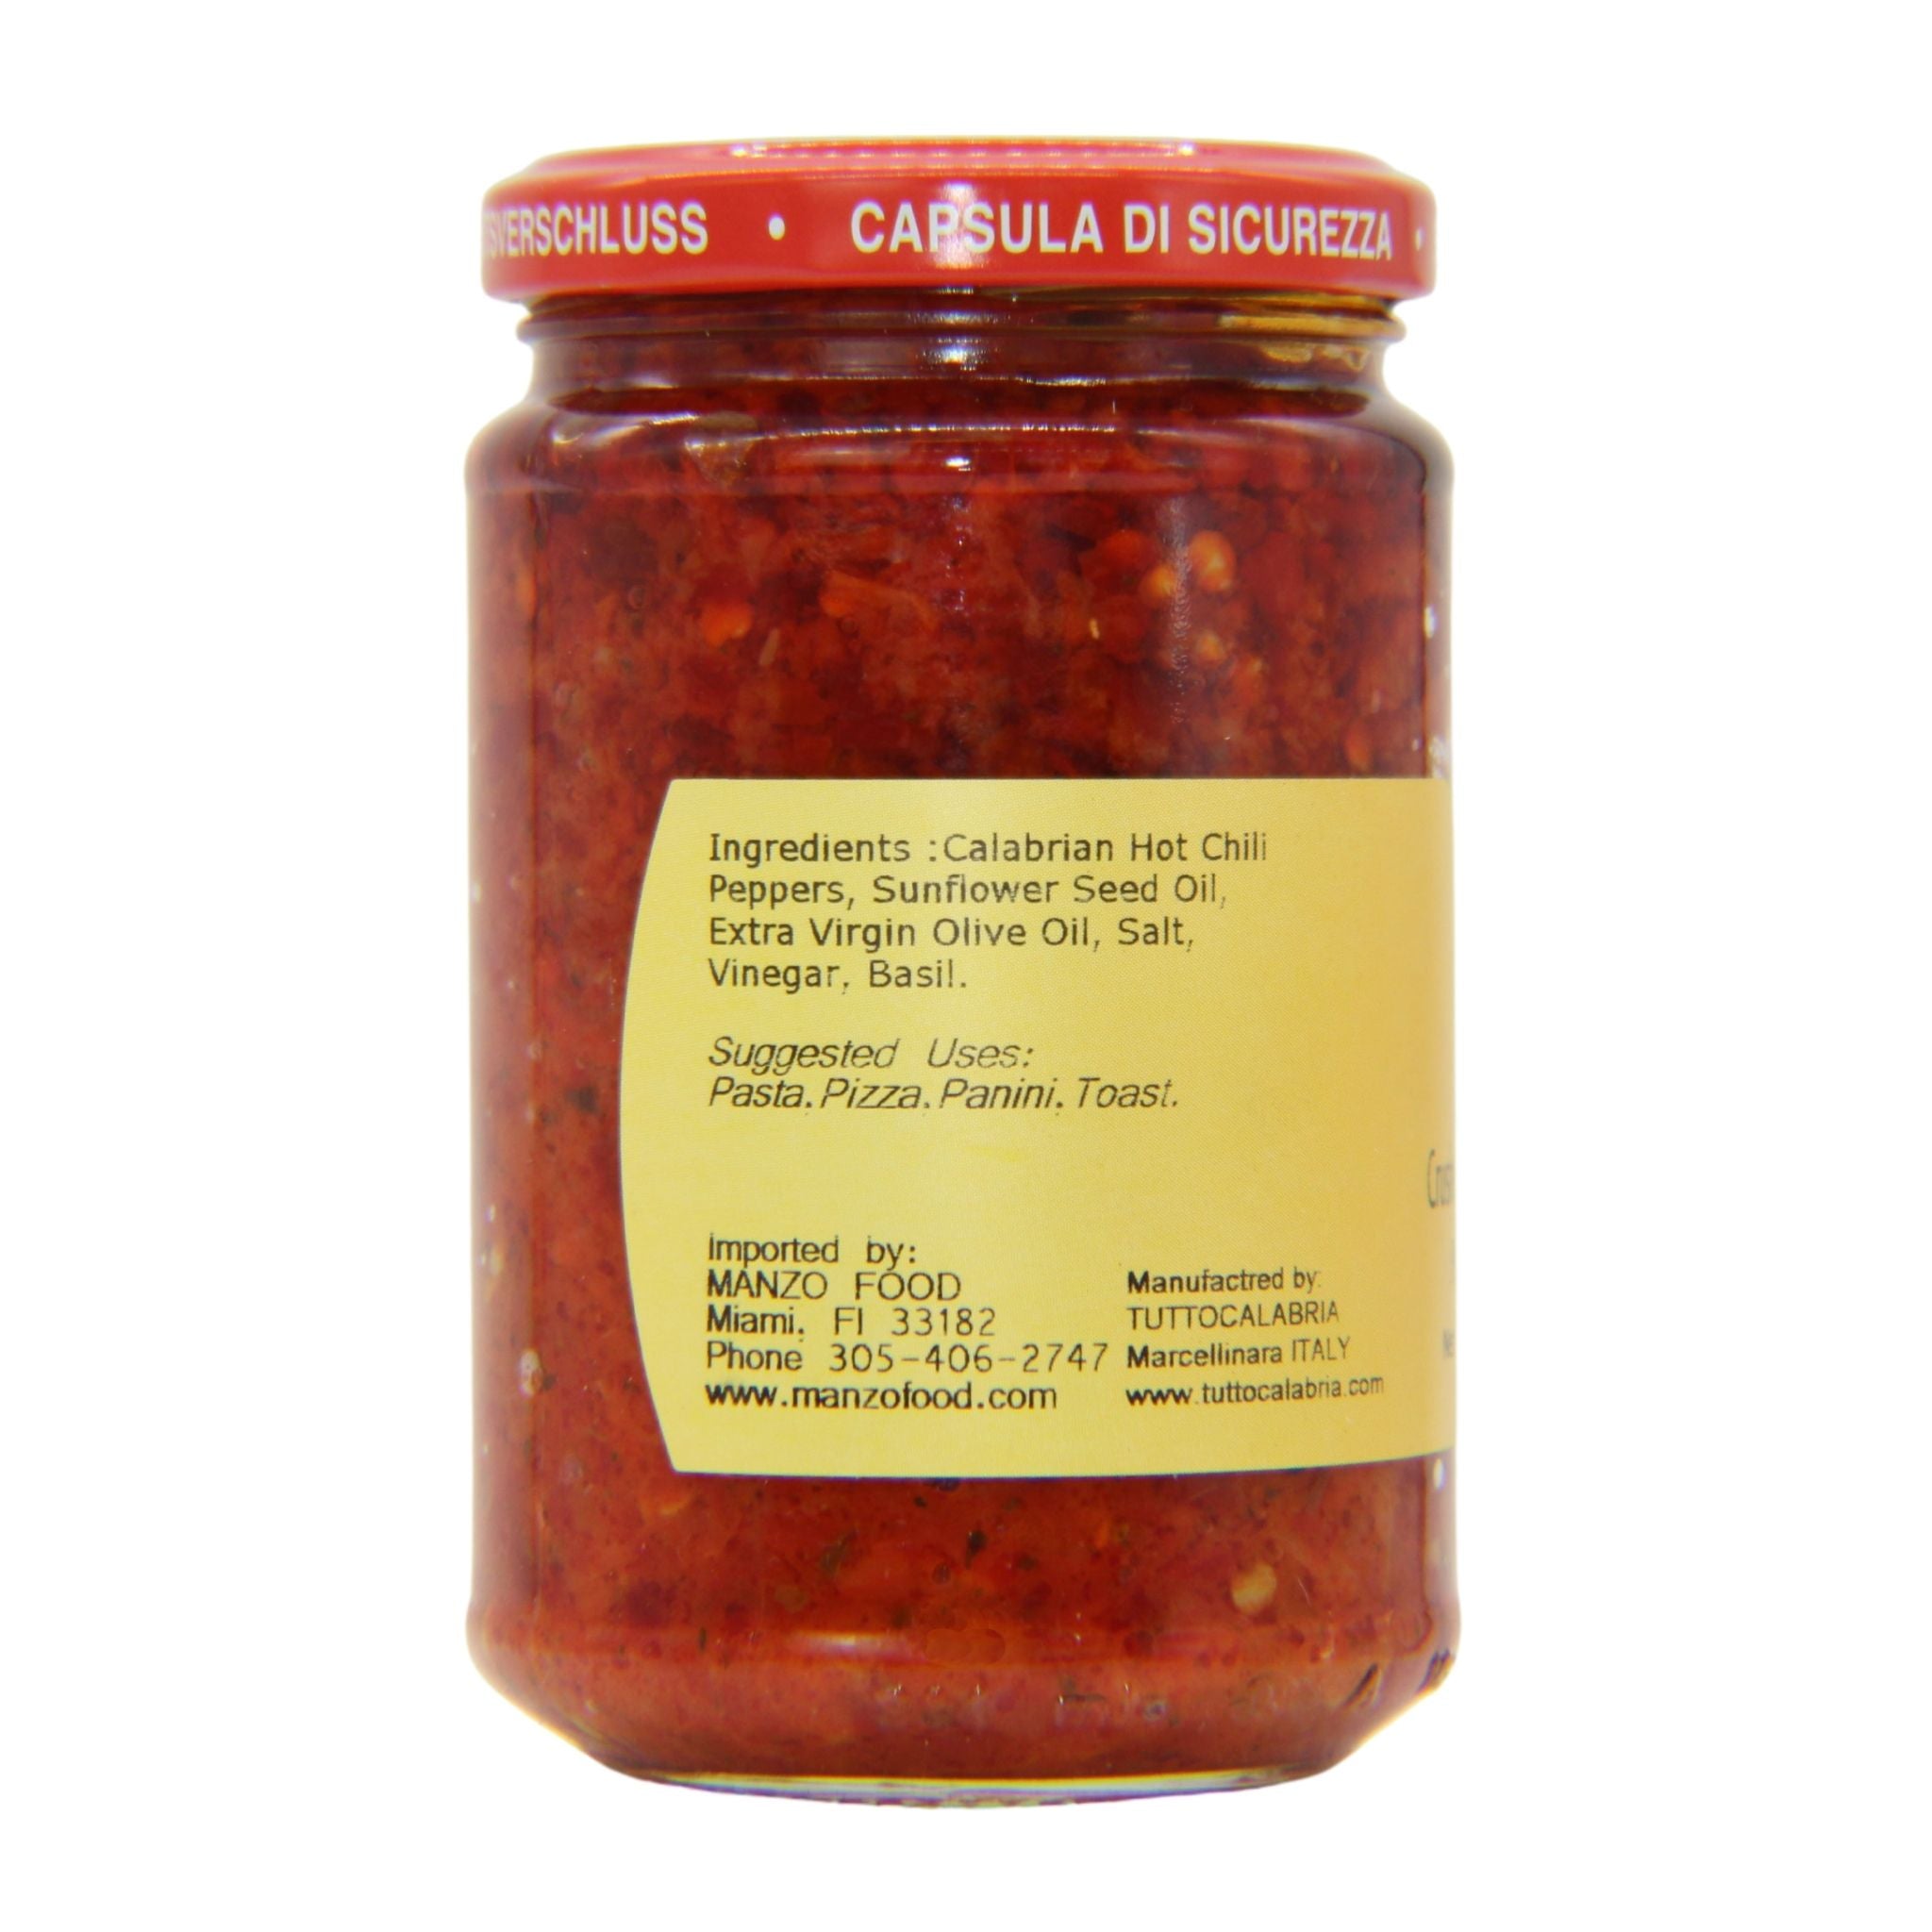 Tutto Calabria Crushed Hot Chili Peppers 10.2 oz.